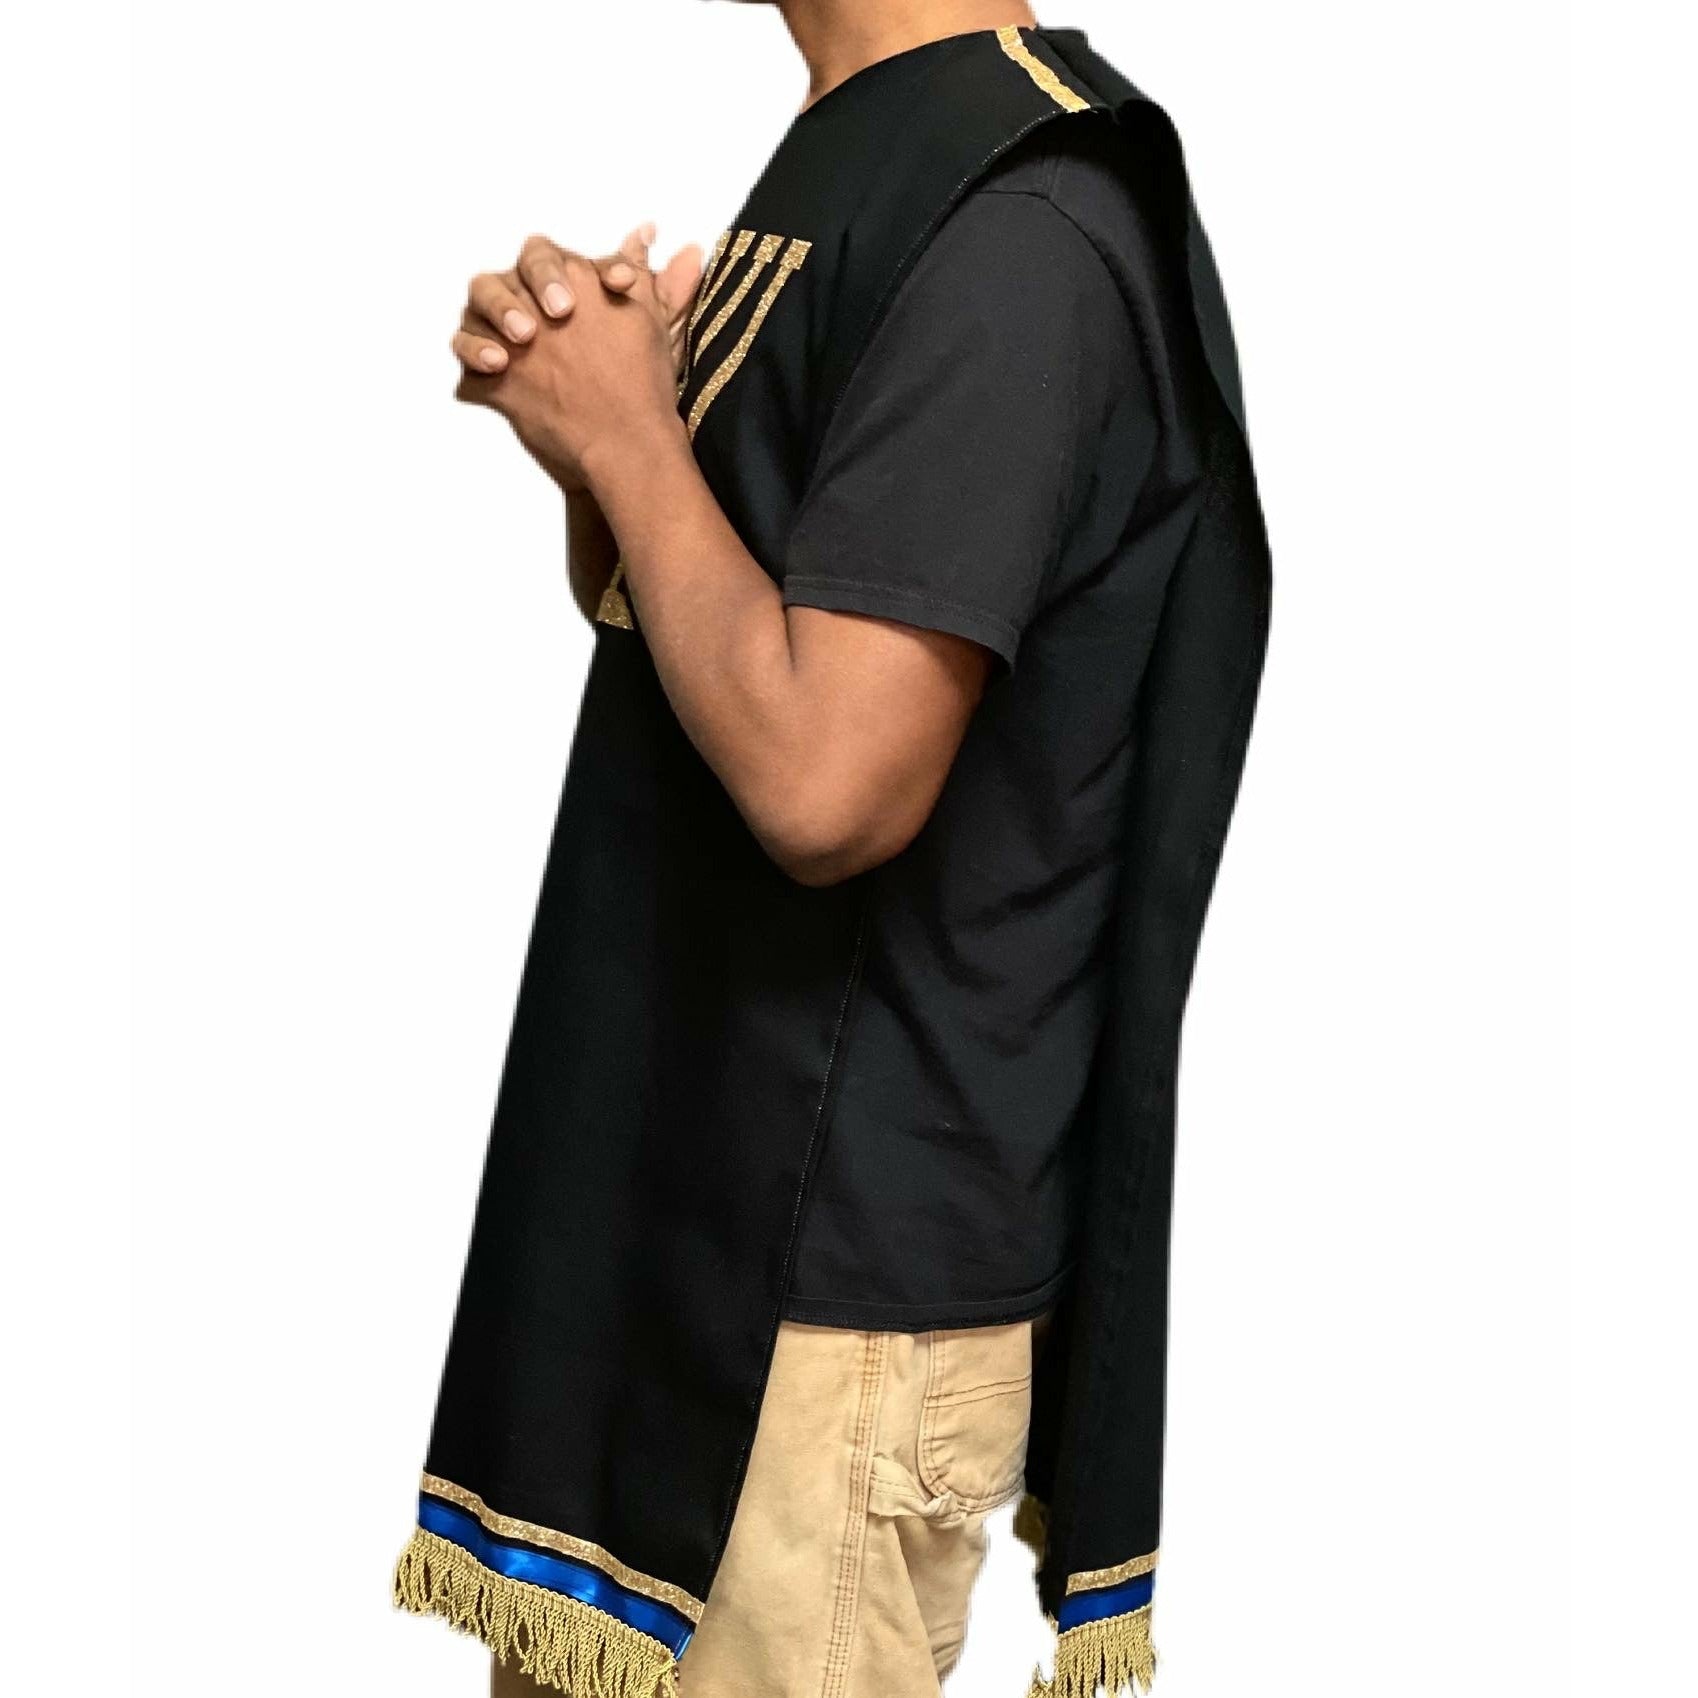 Brew Garment Black and Gold with Menorah